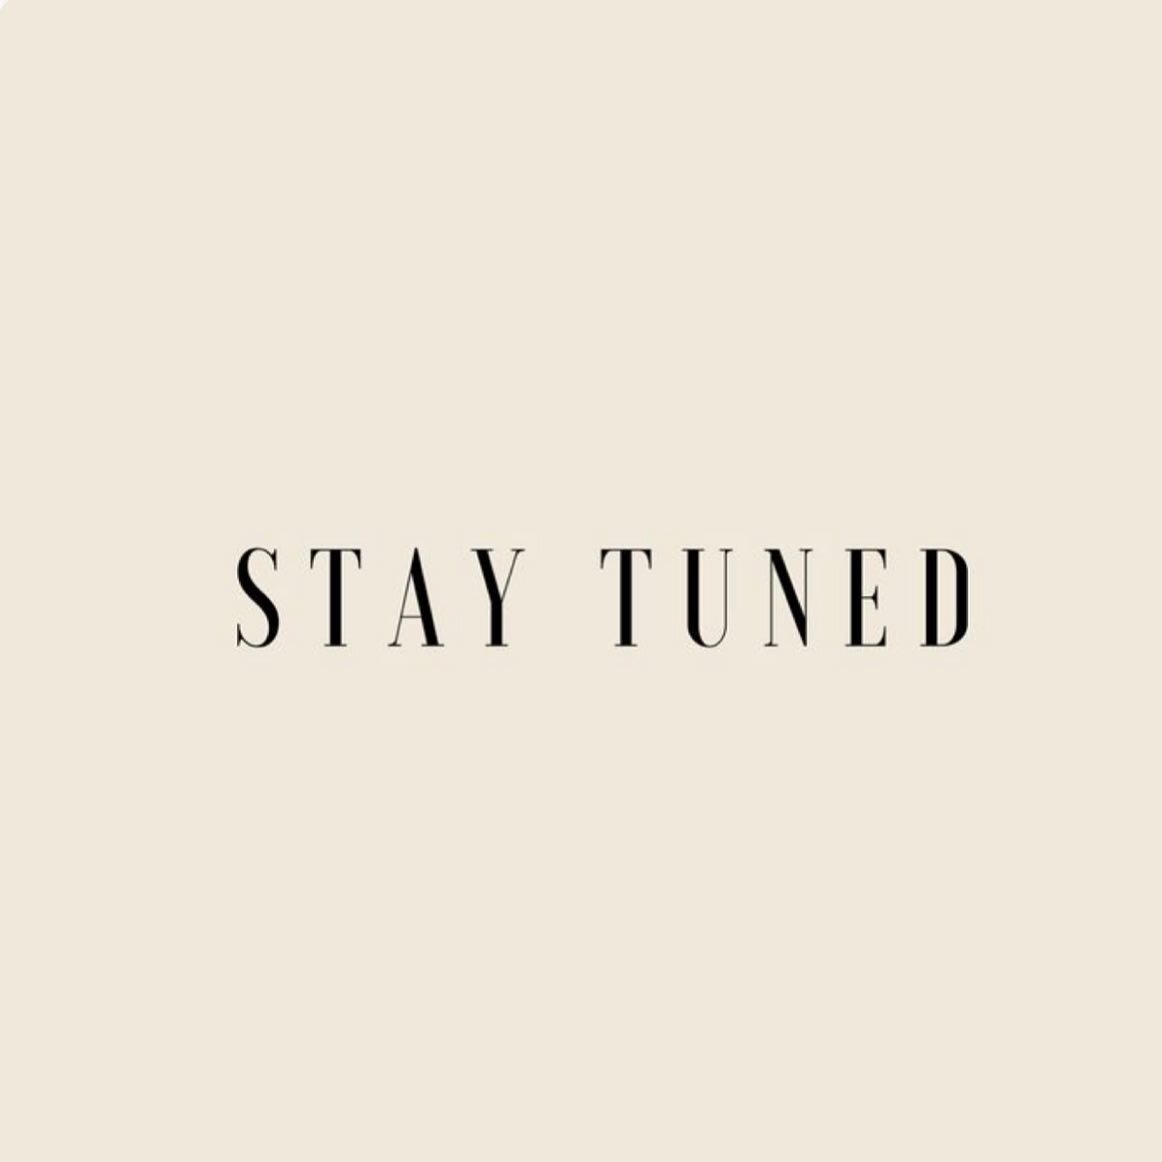 We have a very exciting announcement coming on Monday!

Stay Tuned&hellip;🤎🤎🤎
.
.
.
#permanentmakeup #permanentmakeupartists #browbiz #lashartist #microblading #lipblush #ombrebrows #tattooartist #girlswithtattoos #browtattoo #browlamination #brow